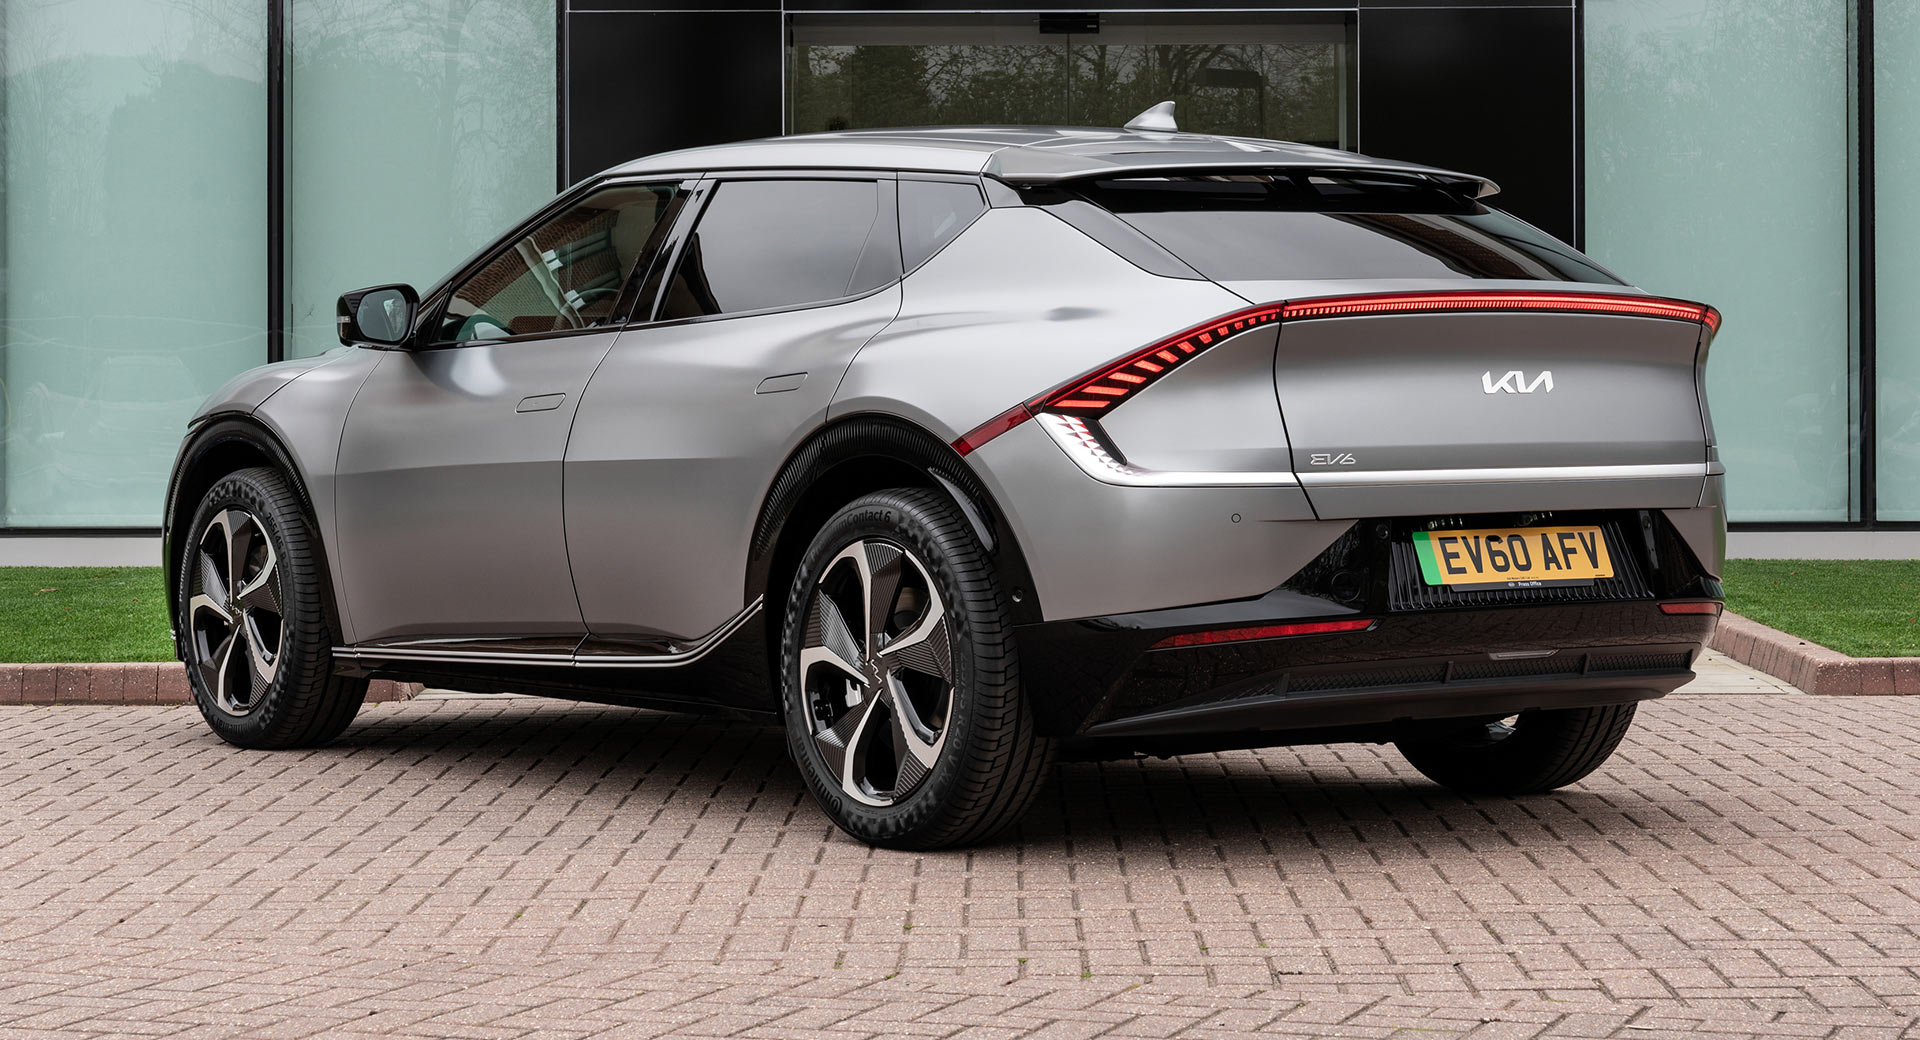 2021-kia-ev6-is-proving-to-be-very-popular-in-europe-prospects-account